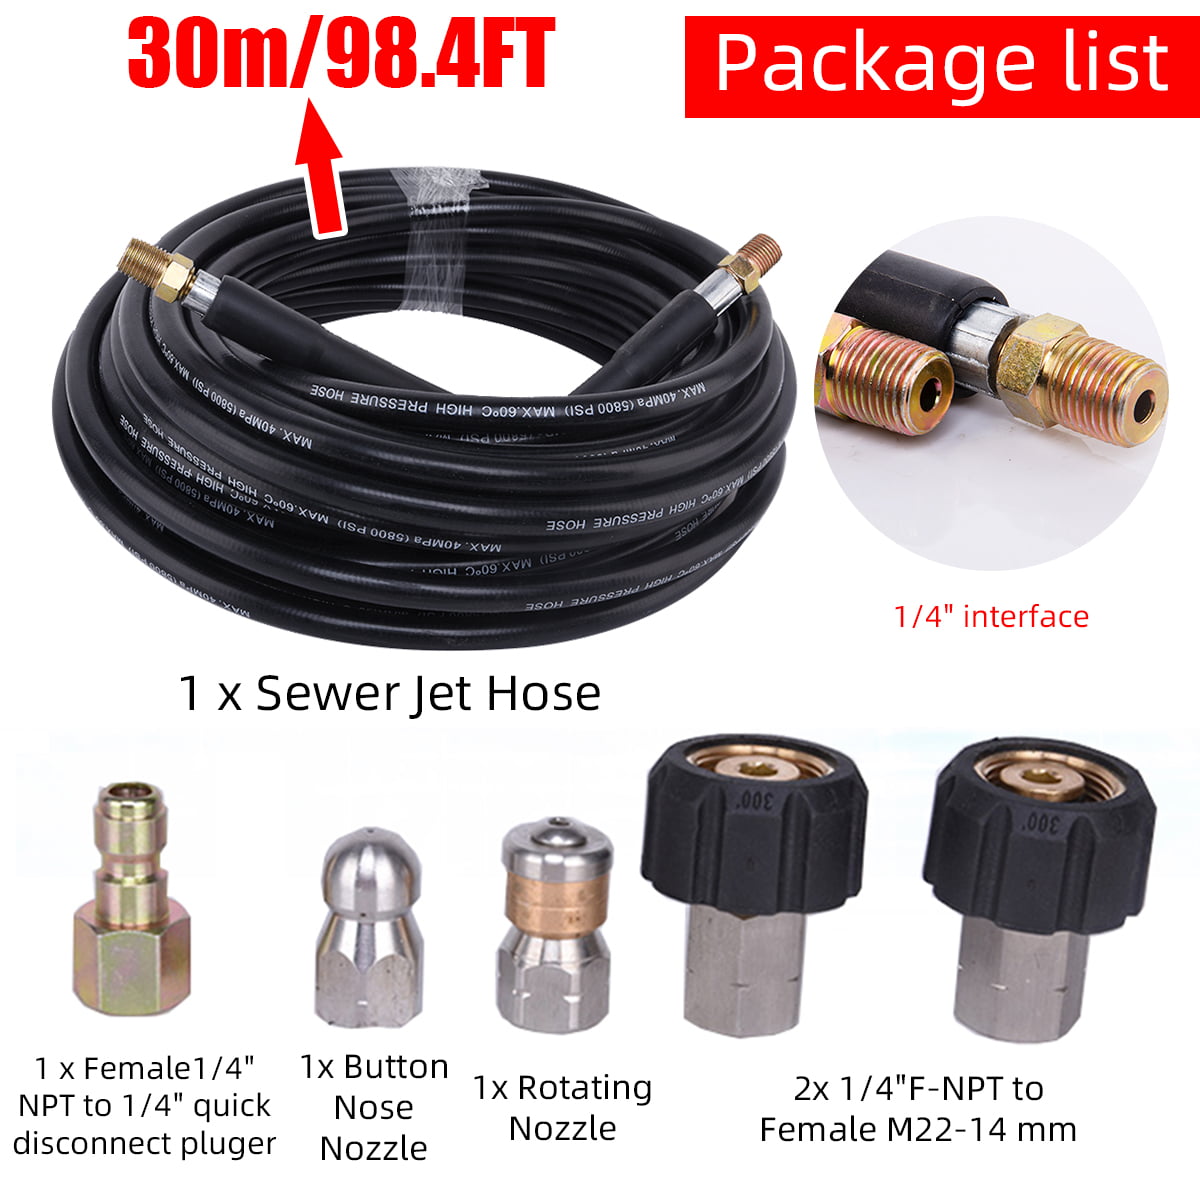 15/30M 1/4'' M-NPT Hose Sewer Line and Drain Jetter Kit W/Sewer Nozzle & Adapter